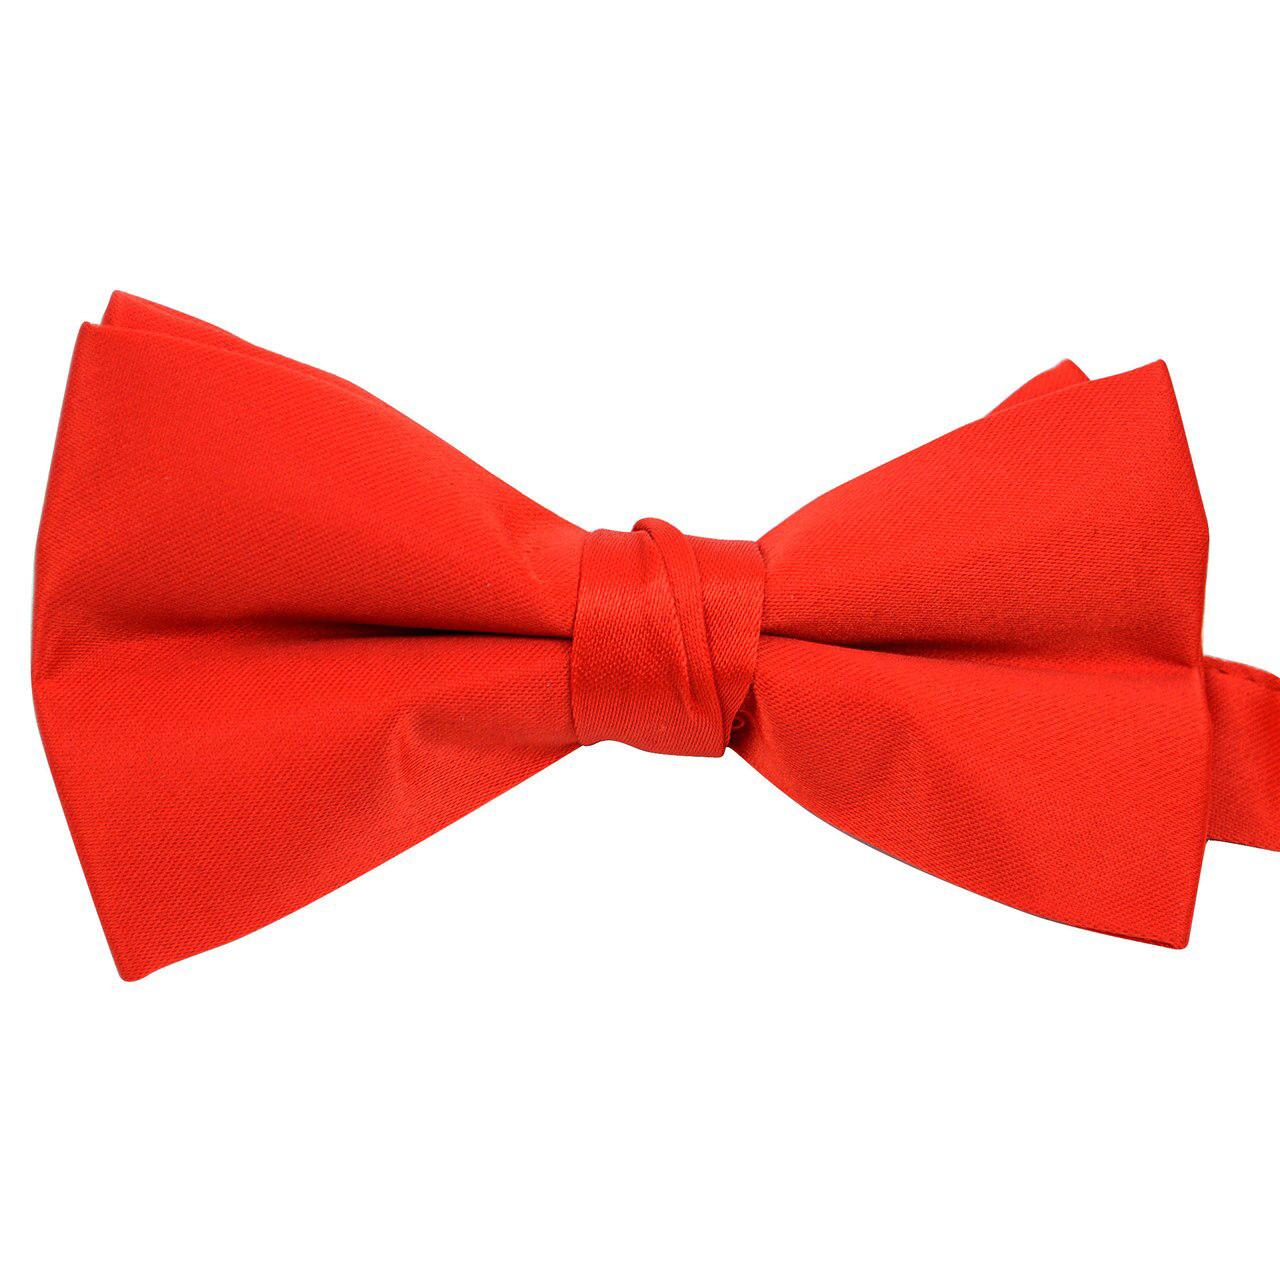  Solid Bow Tie Boxed - Red